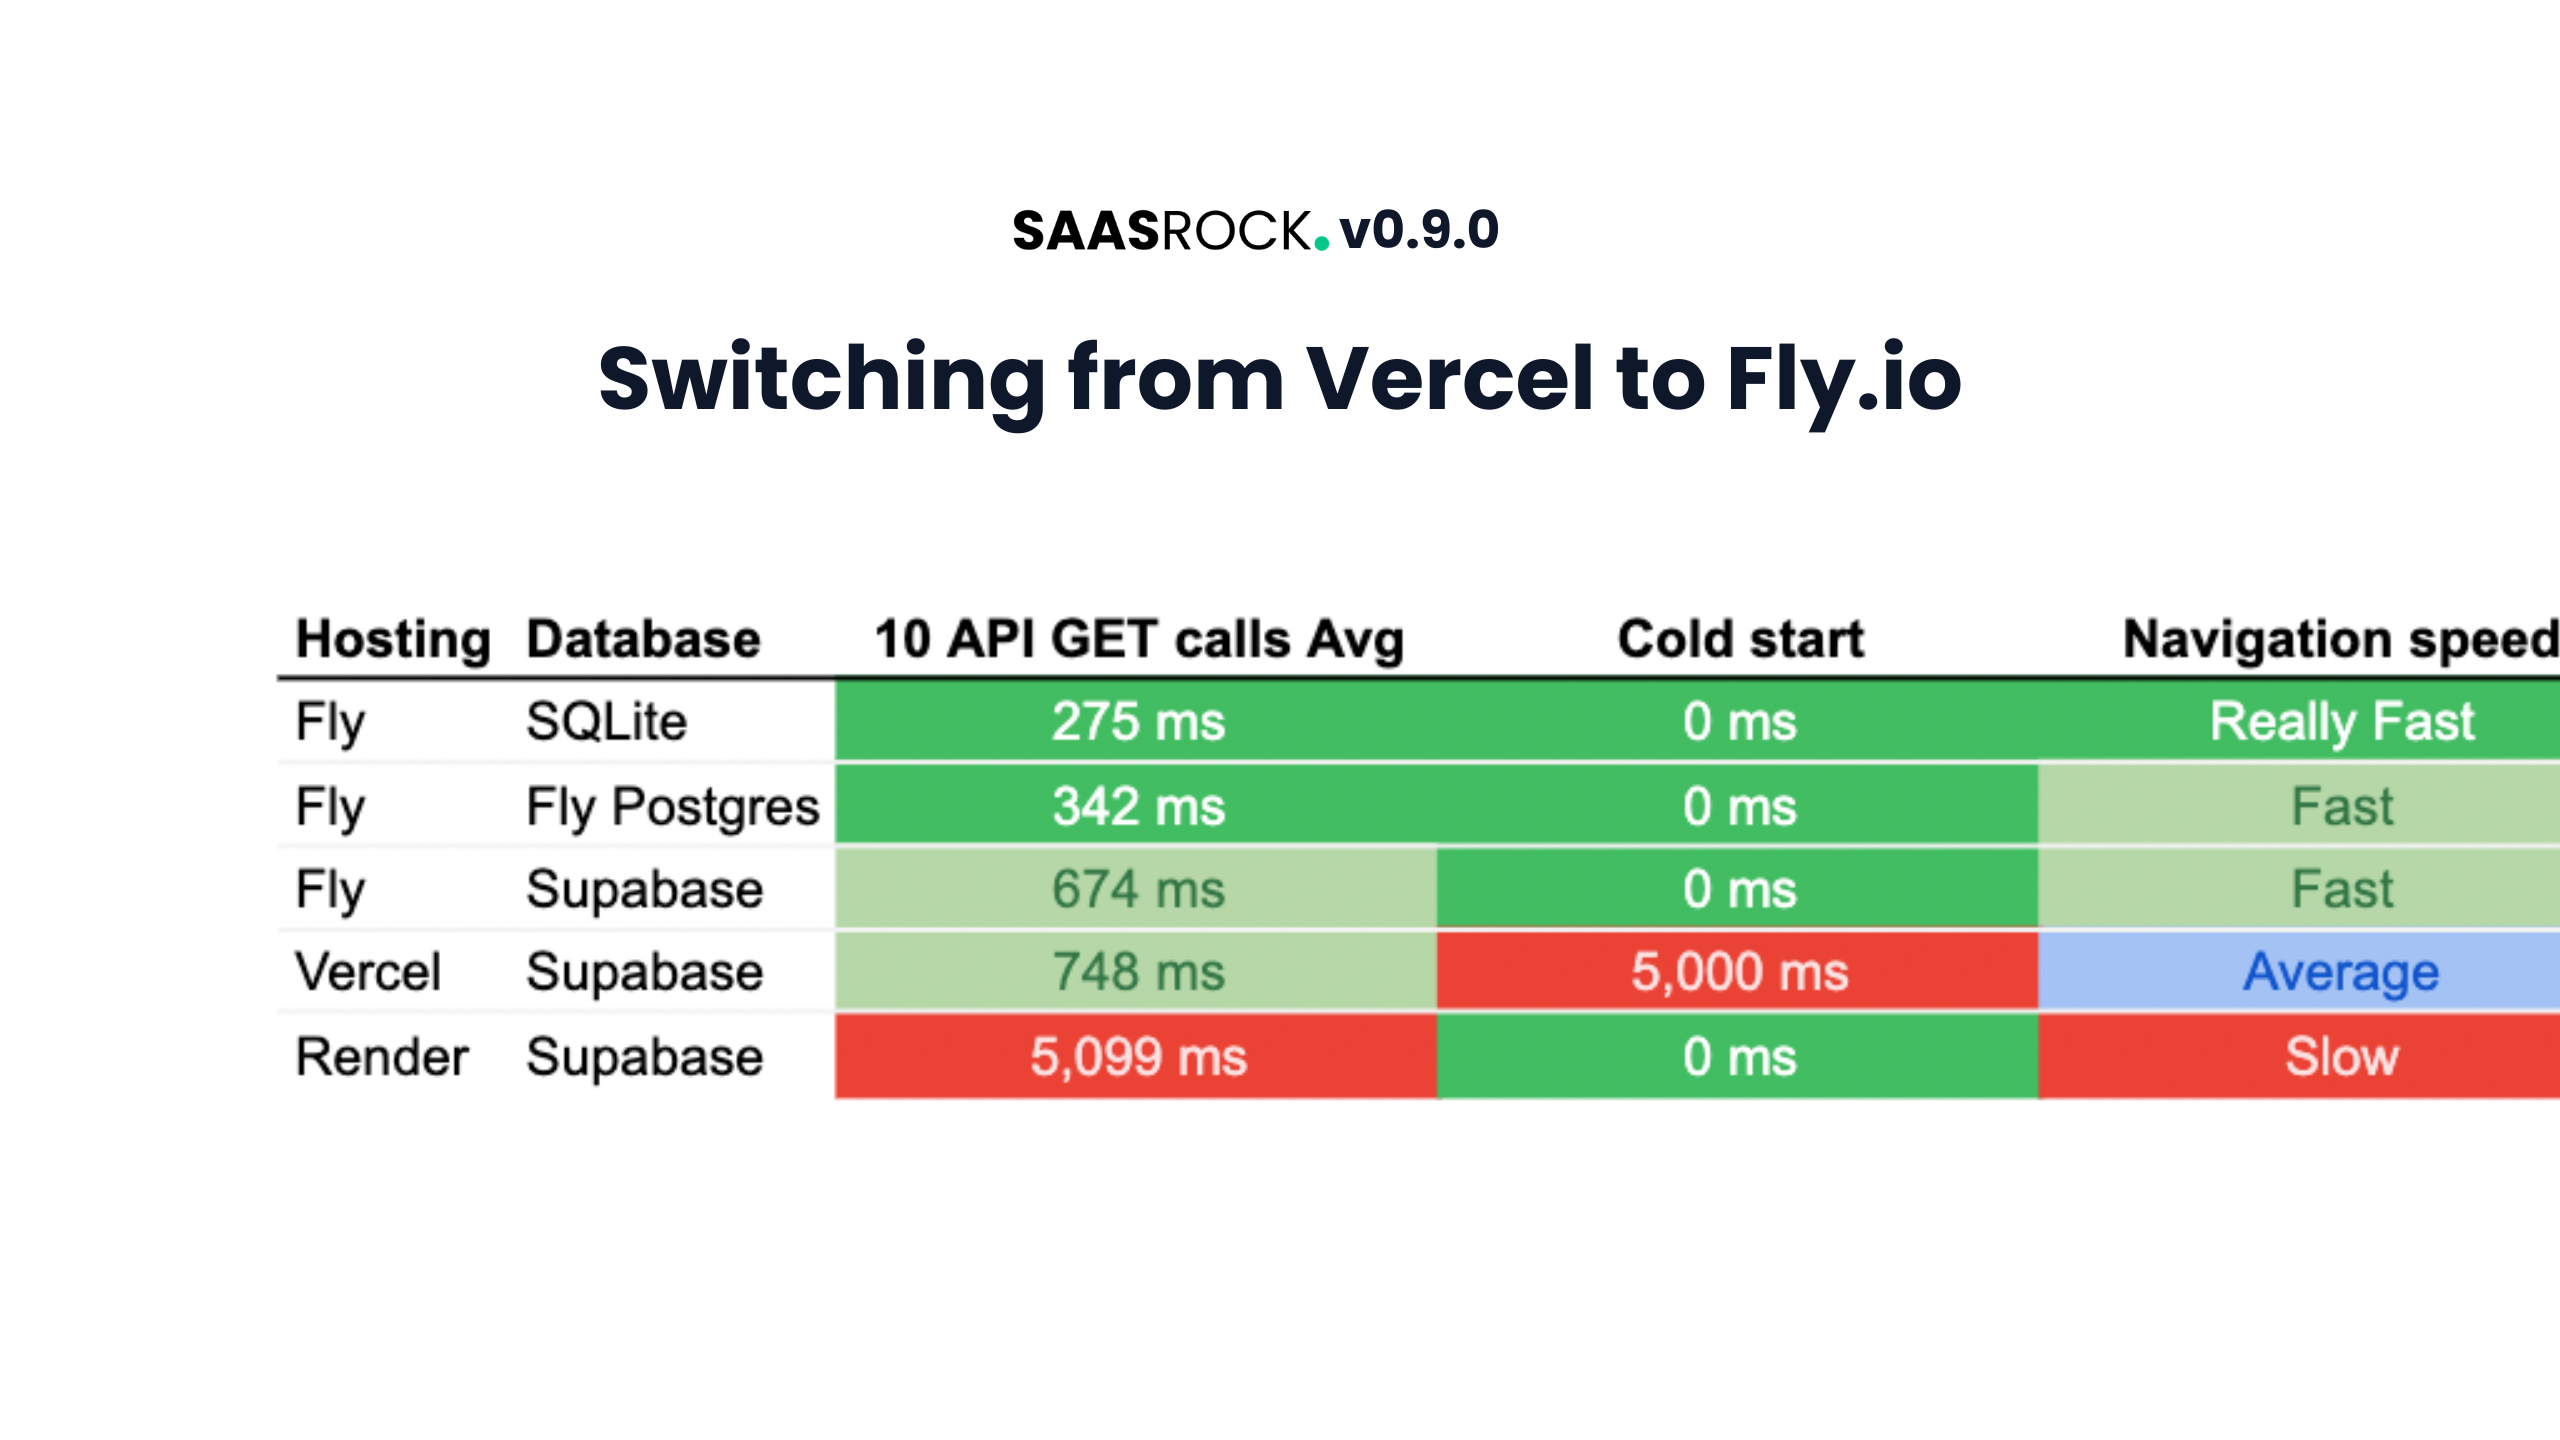 SaasRock 0.9.0 - Switching from Vercel to Fly.io